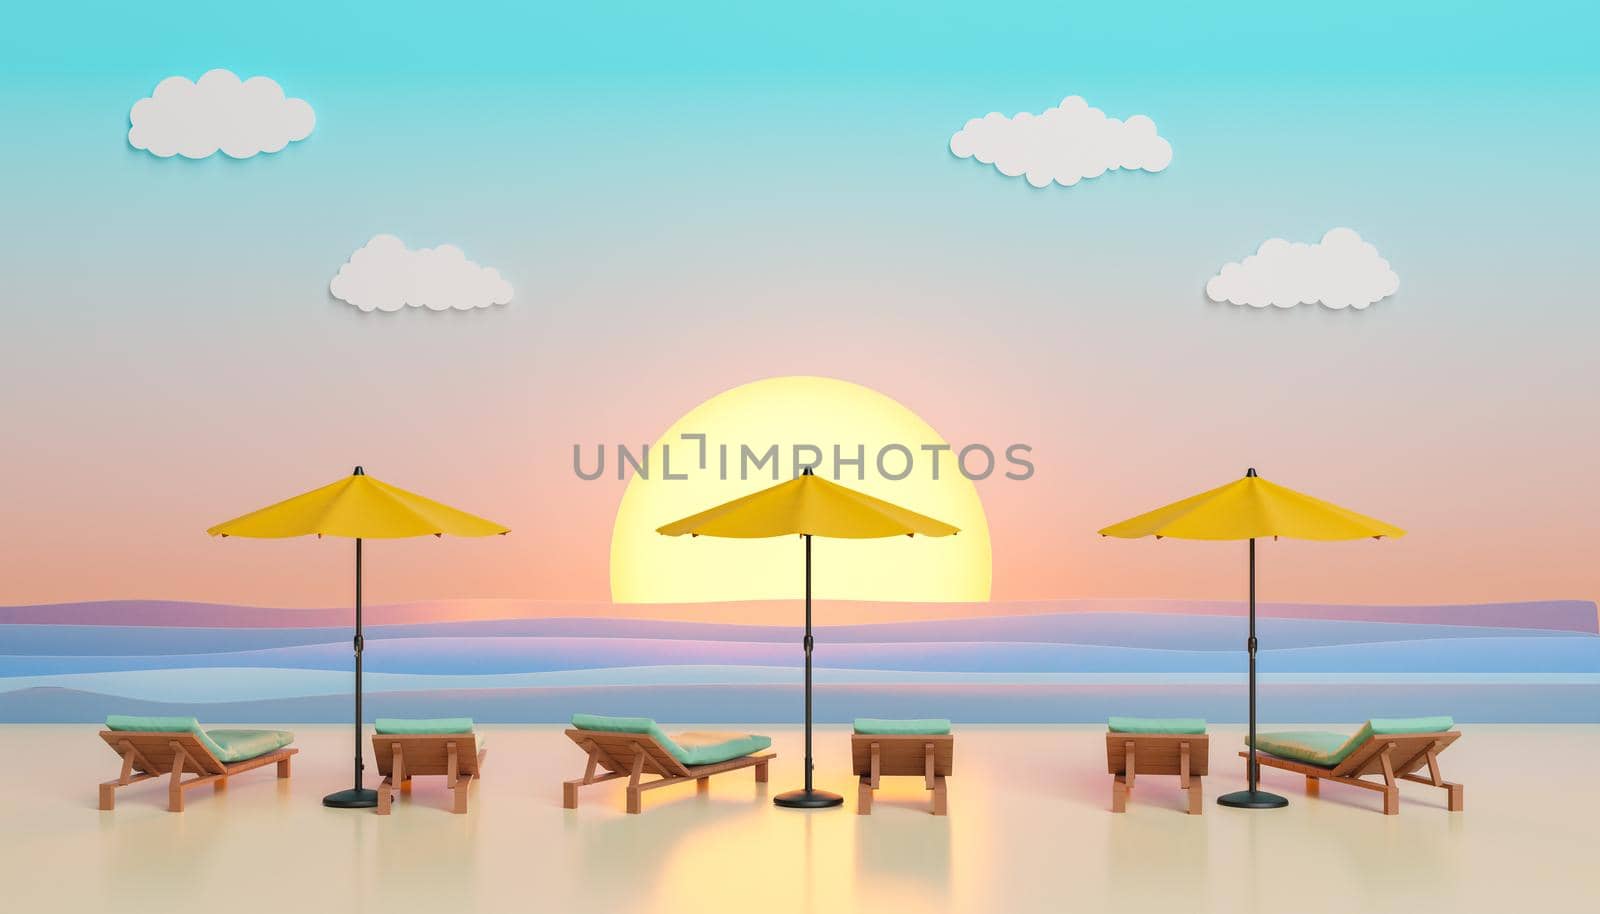 umbrellas and loungers on an artificial beach at sunset in a studio. summer concept, beach, vacations, travel, resorts and relaxation. 3d rendering